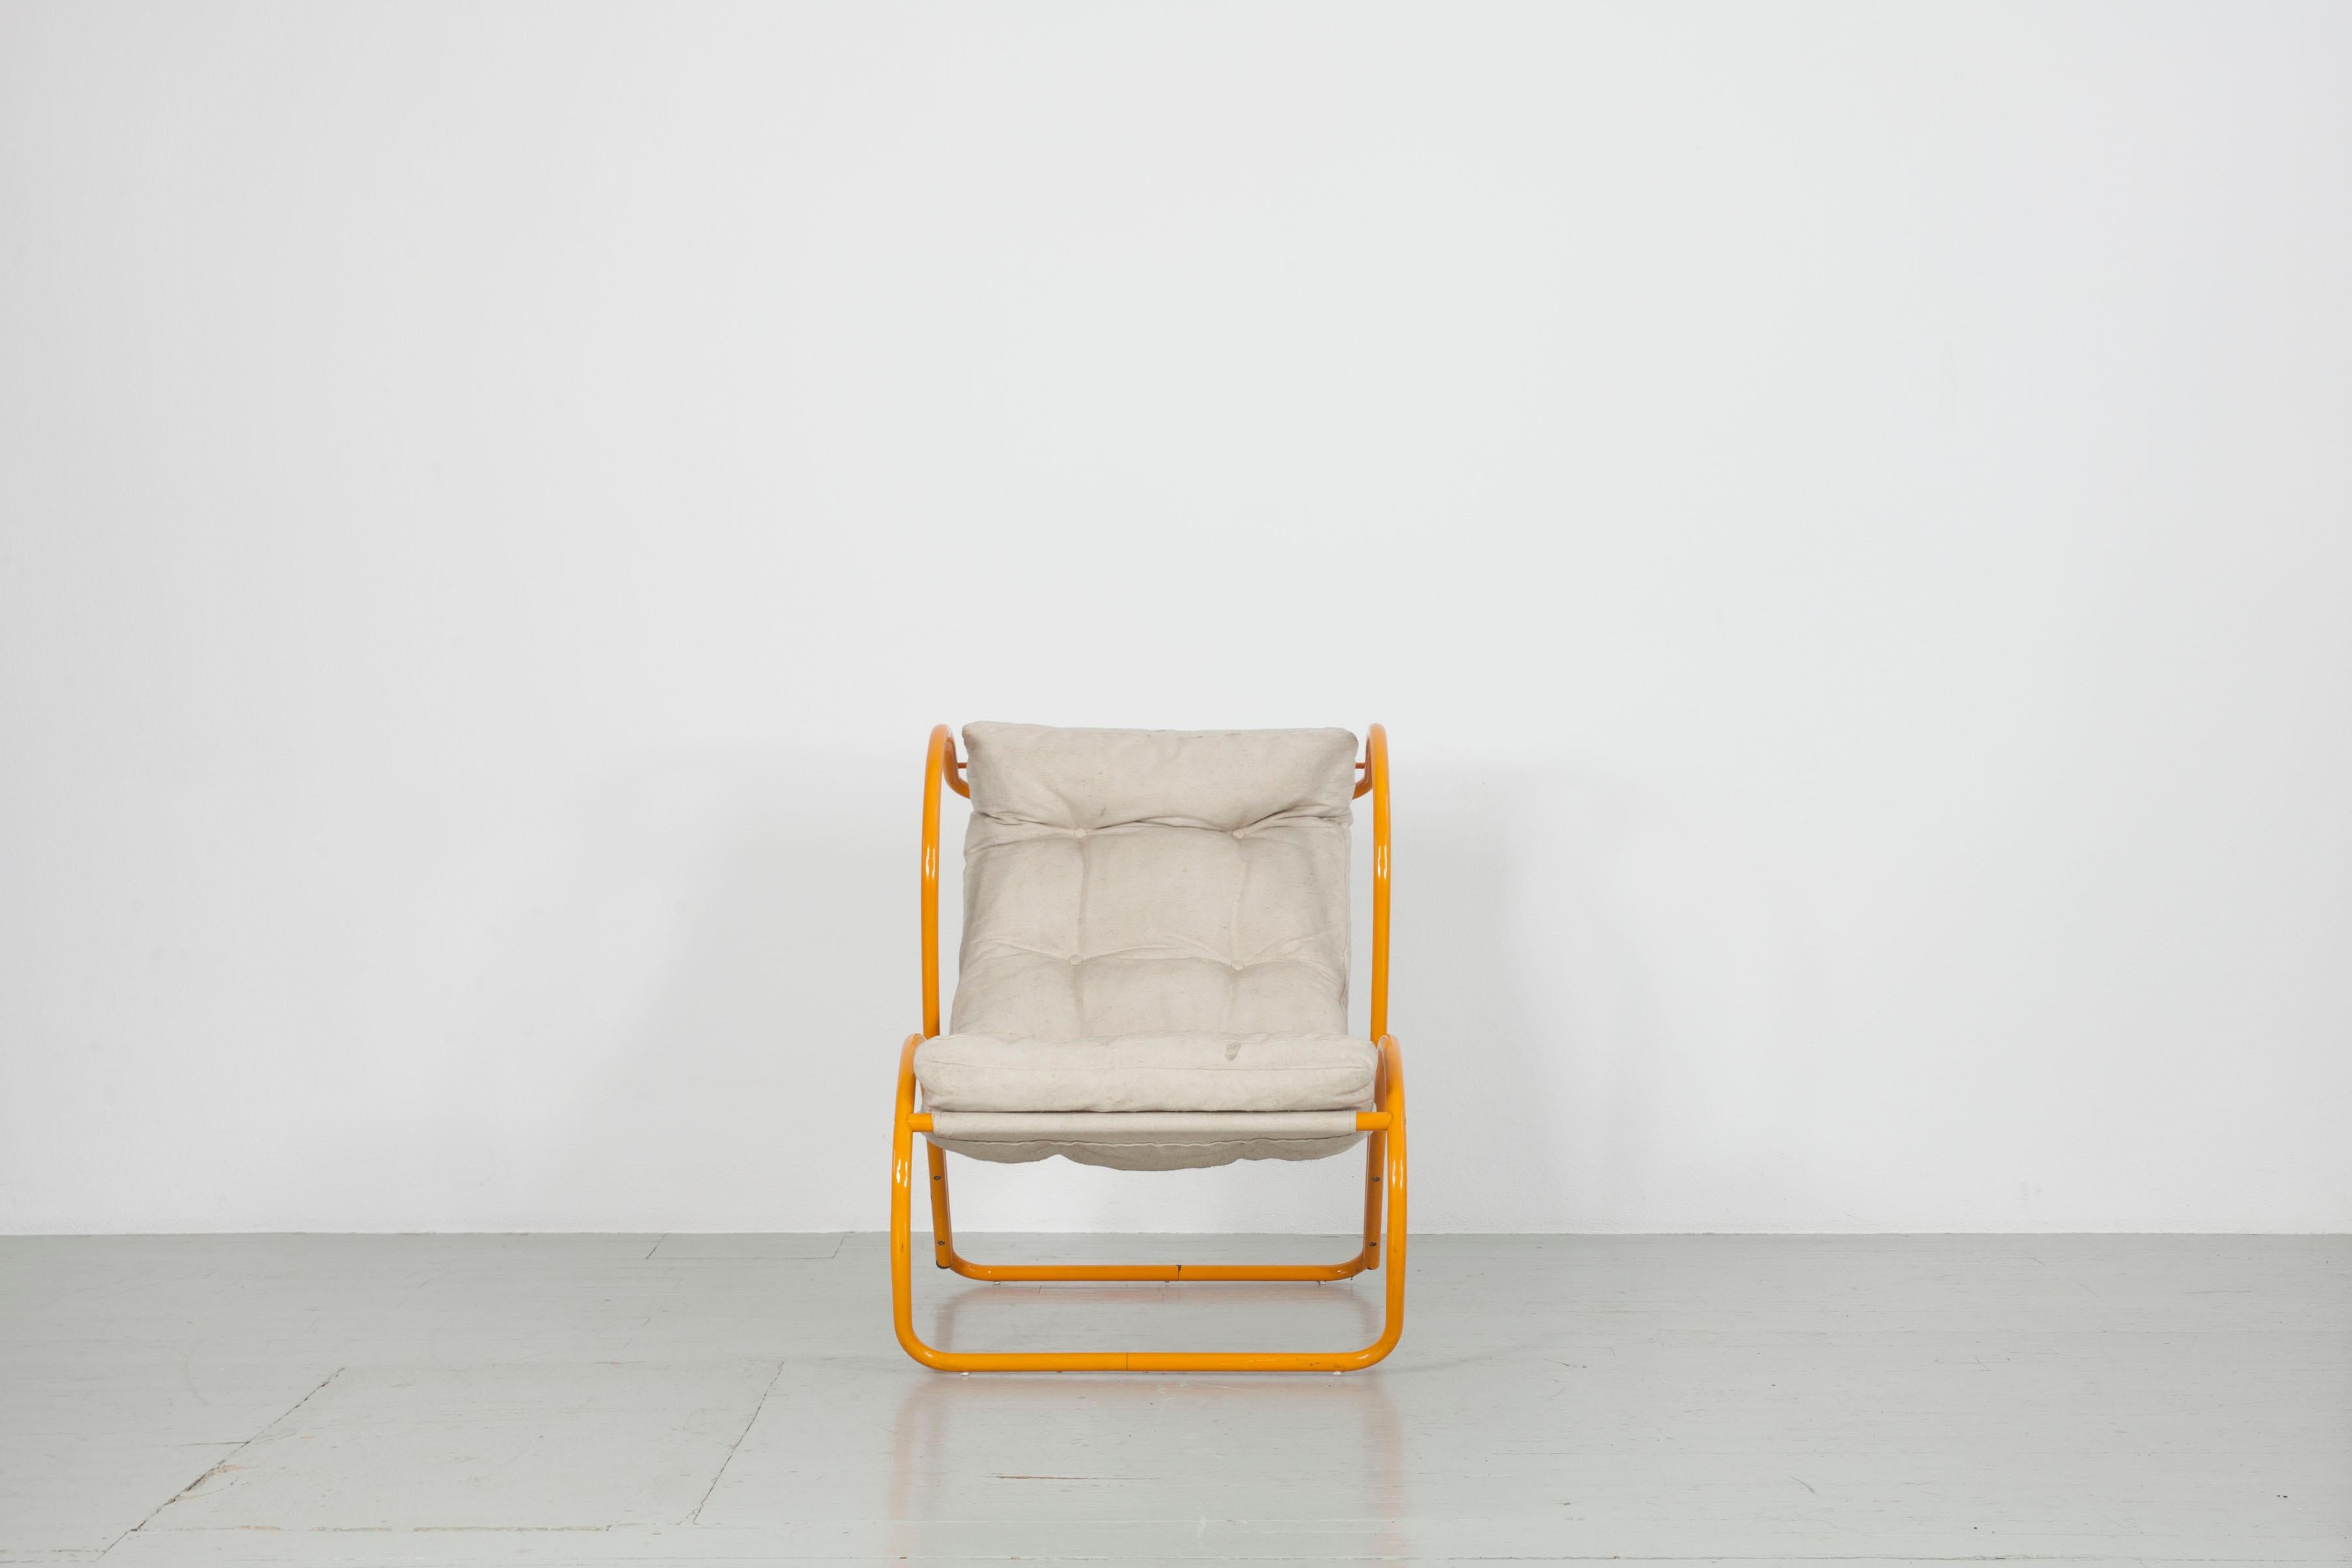 Yellow Armchair in the Manner of Gae Aulenti, Italy, 1960s For Sale 2